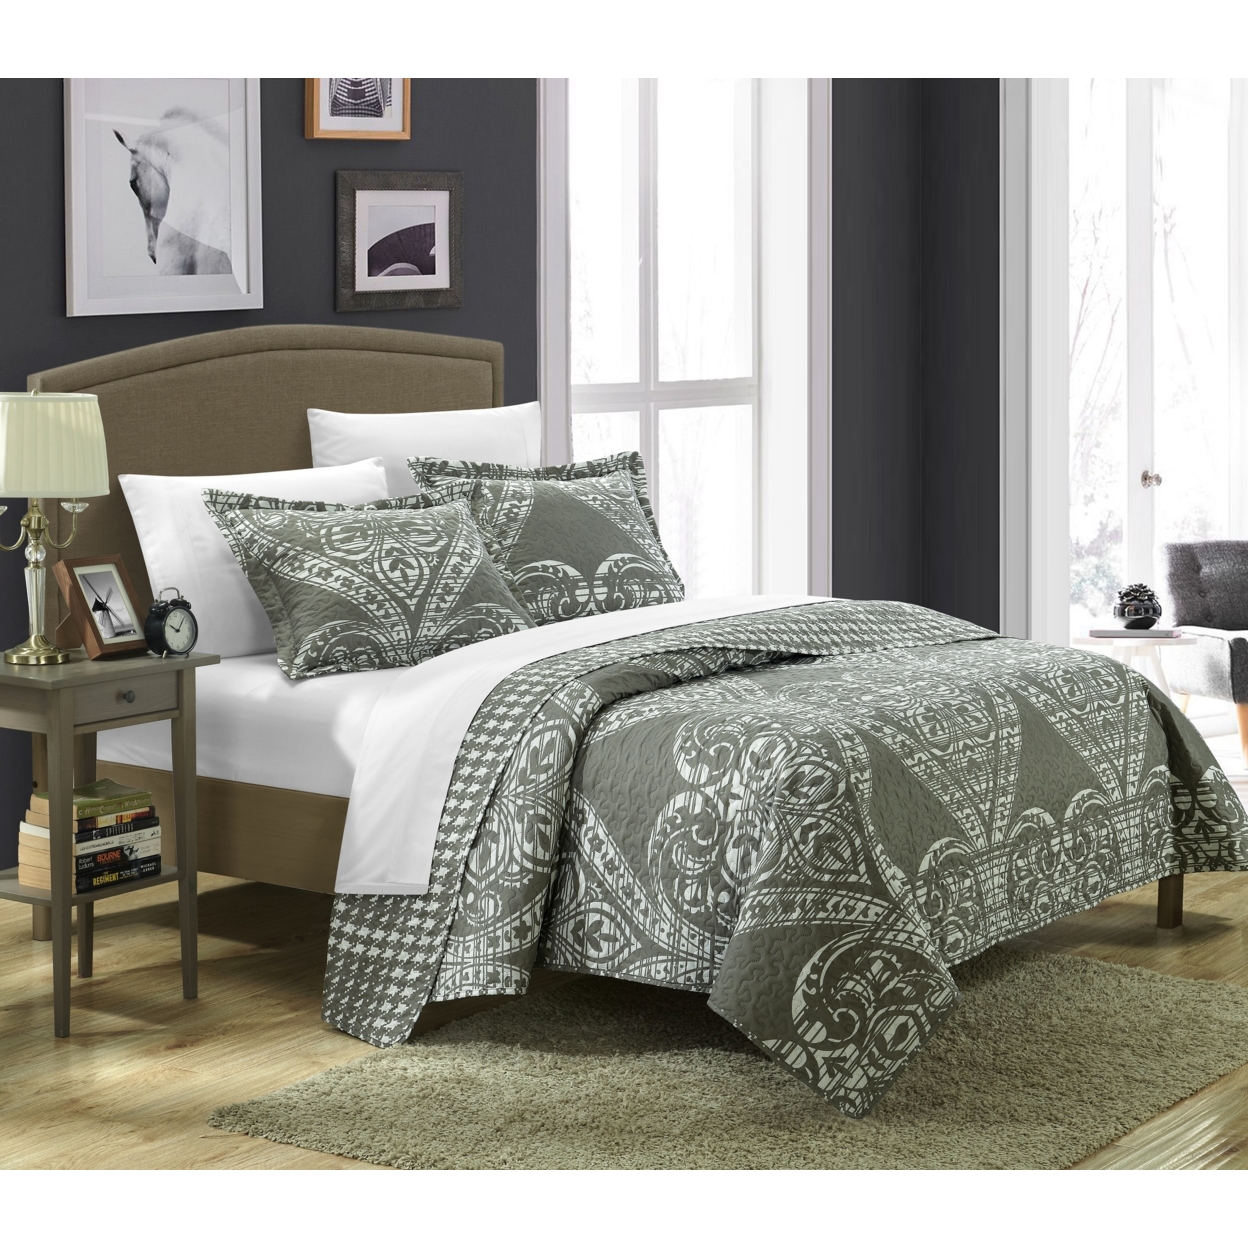 3 Or 2 Piece Revenna REVERSIBLE Printed Quilt Set. Front A Traditional Pattern And Reverses Into A Houndstooth Pattern - Navy, Twin